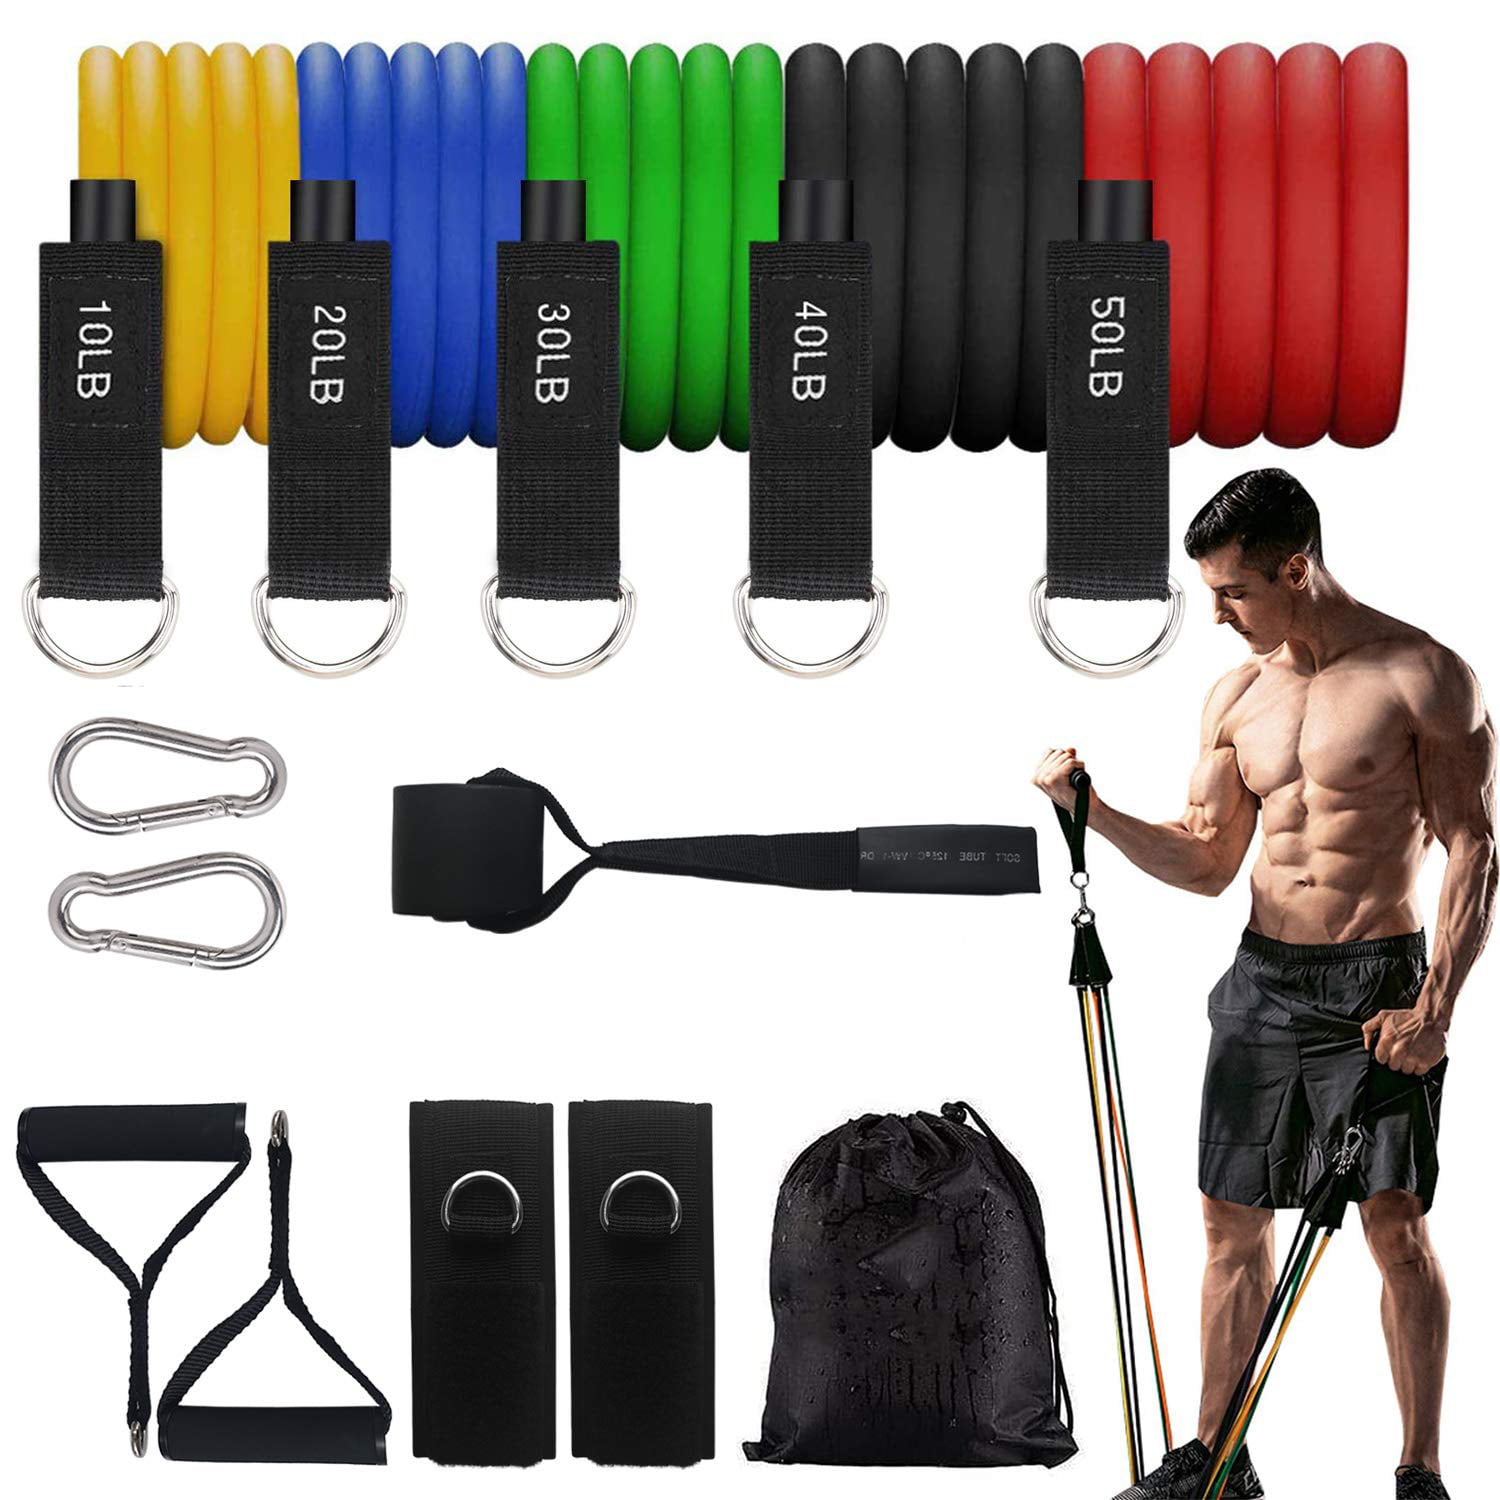 Home Gym Workouts 5 Resistance Bands Set Stackable to 125 lbs for Working Out Ankle Straps Includes Handle and Door Anchor Carry Case for Resistance Training CACHIL Exercise Bands Sets 11 Pack